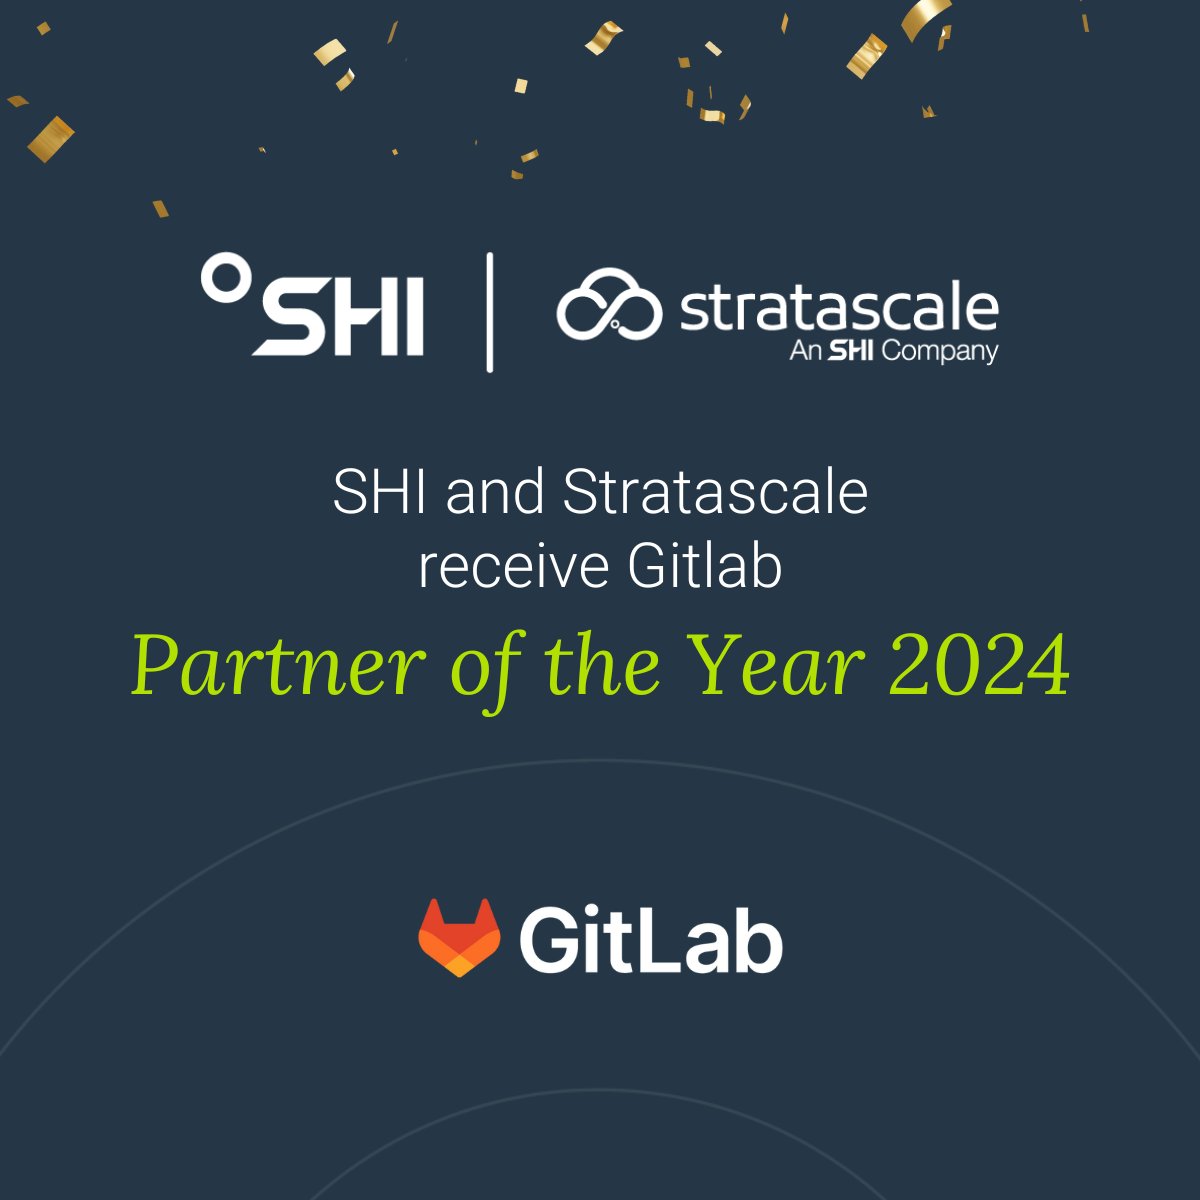 Let's raise our virtual glasses! 🥂 We're celebrating SHI and Stratascale for being selected as Partner of the Year for @GitLab. When you combine the power of SHI and Stratascale, you get a one-stop shop for Gitlab. #SolveWithSHI #PartneringWithSHI